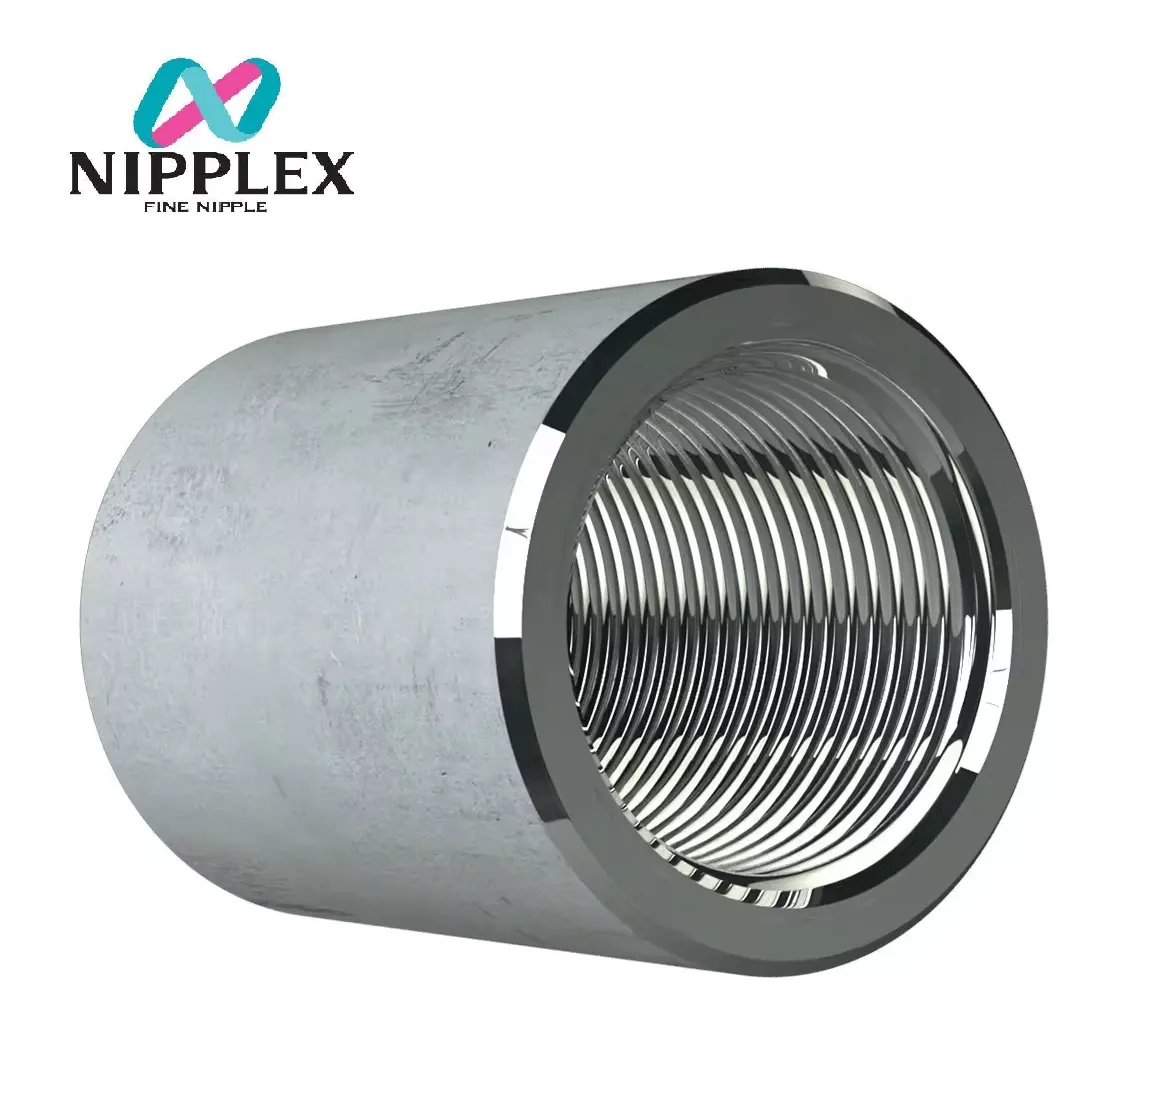 High quality SUS304 stainless steel standard socket in taper or half taper shape at very good prices.